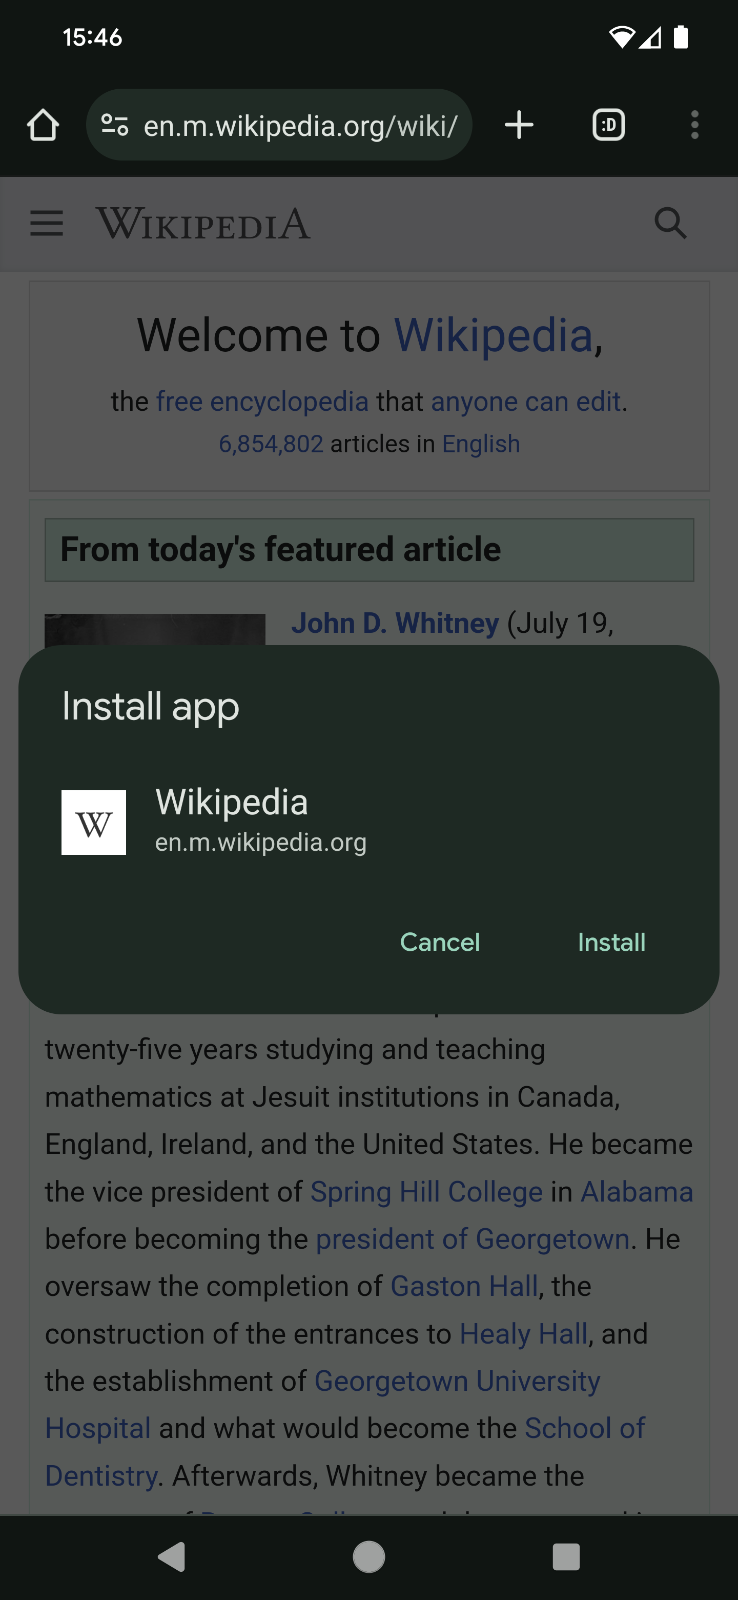 Install app dialog on the Wikipedia site.